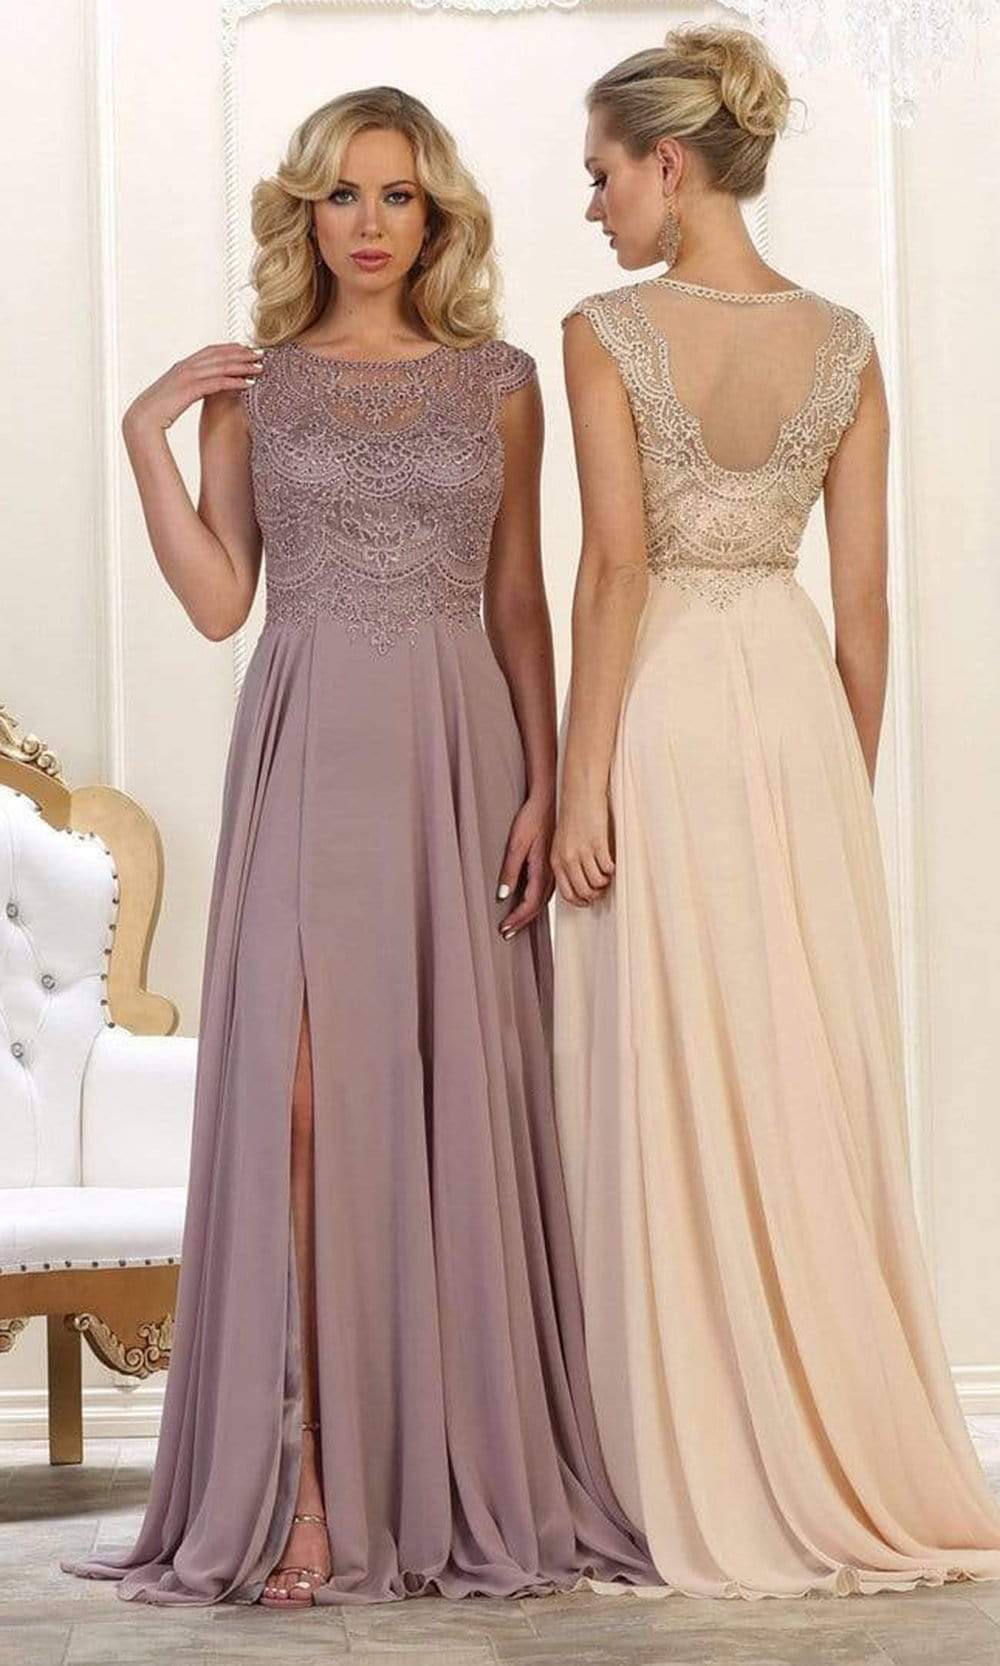 May Queen - MQ1563B Bateau A-Line Dress with Slit Mother of the Bride Dresses 22 / Mauve